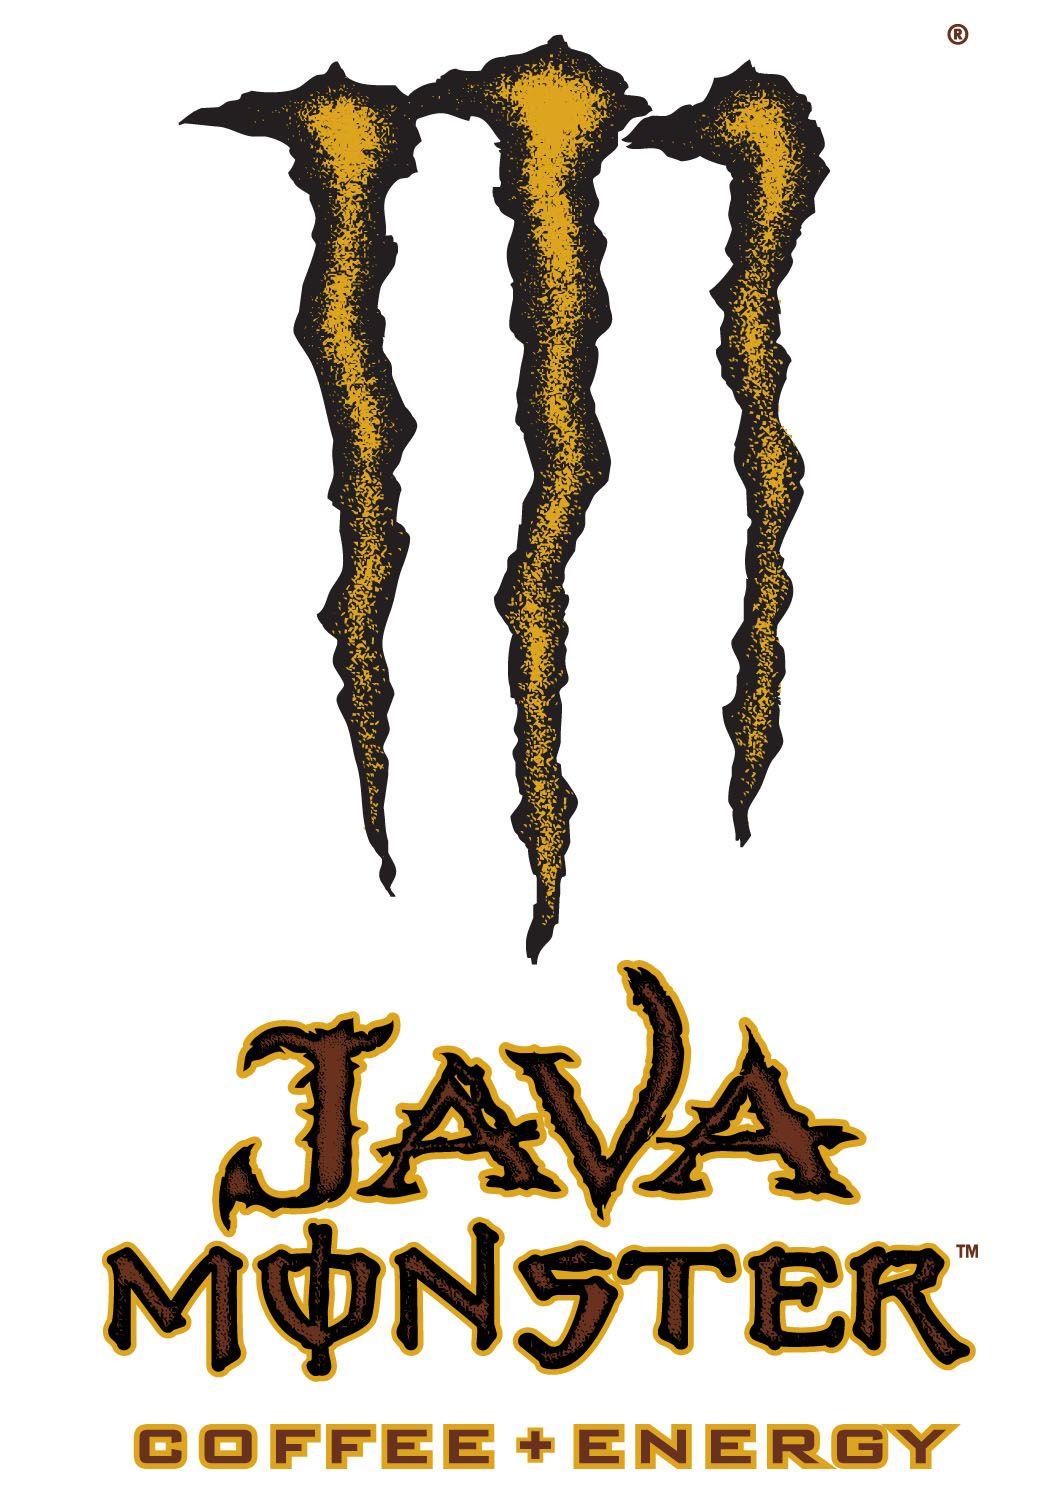 Monster Java Logo - monster Java Toyota Tundra by Michael W. - Trading Paints